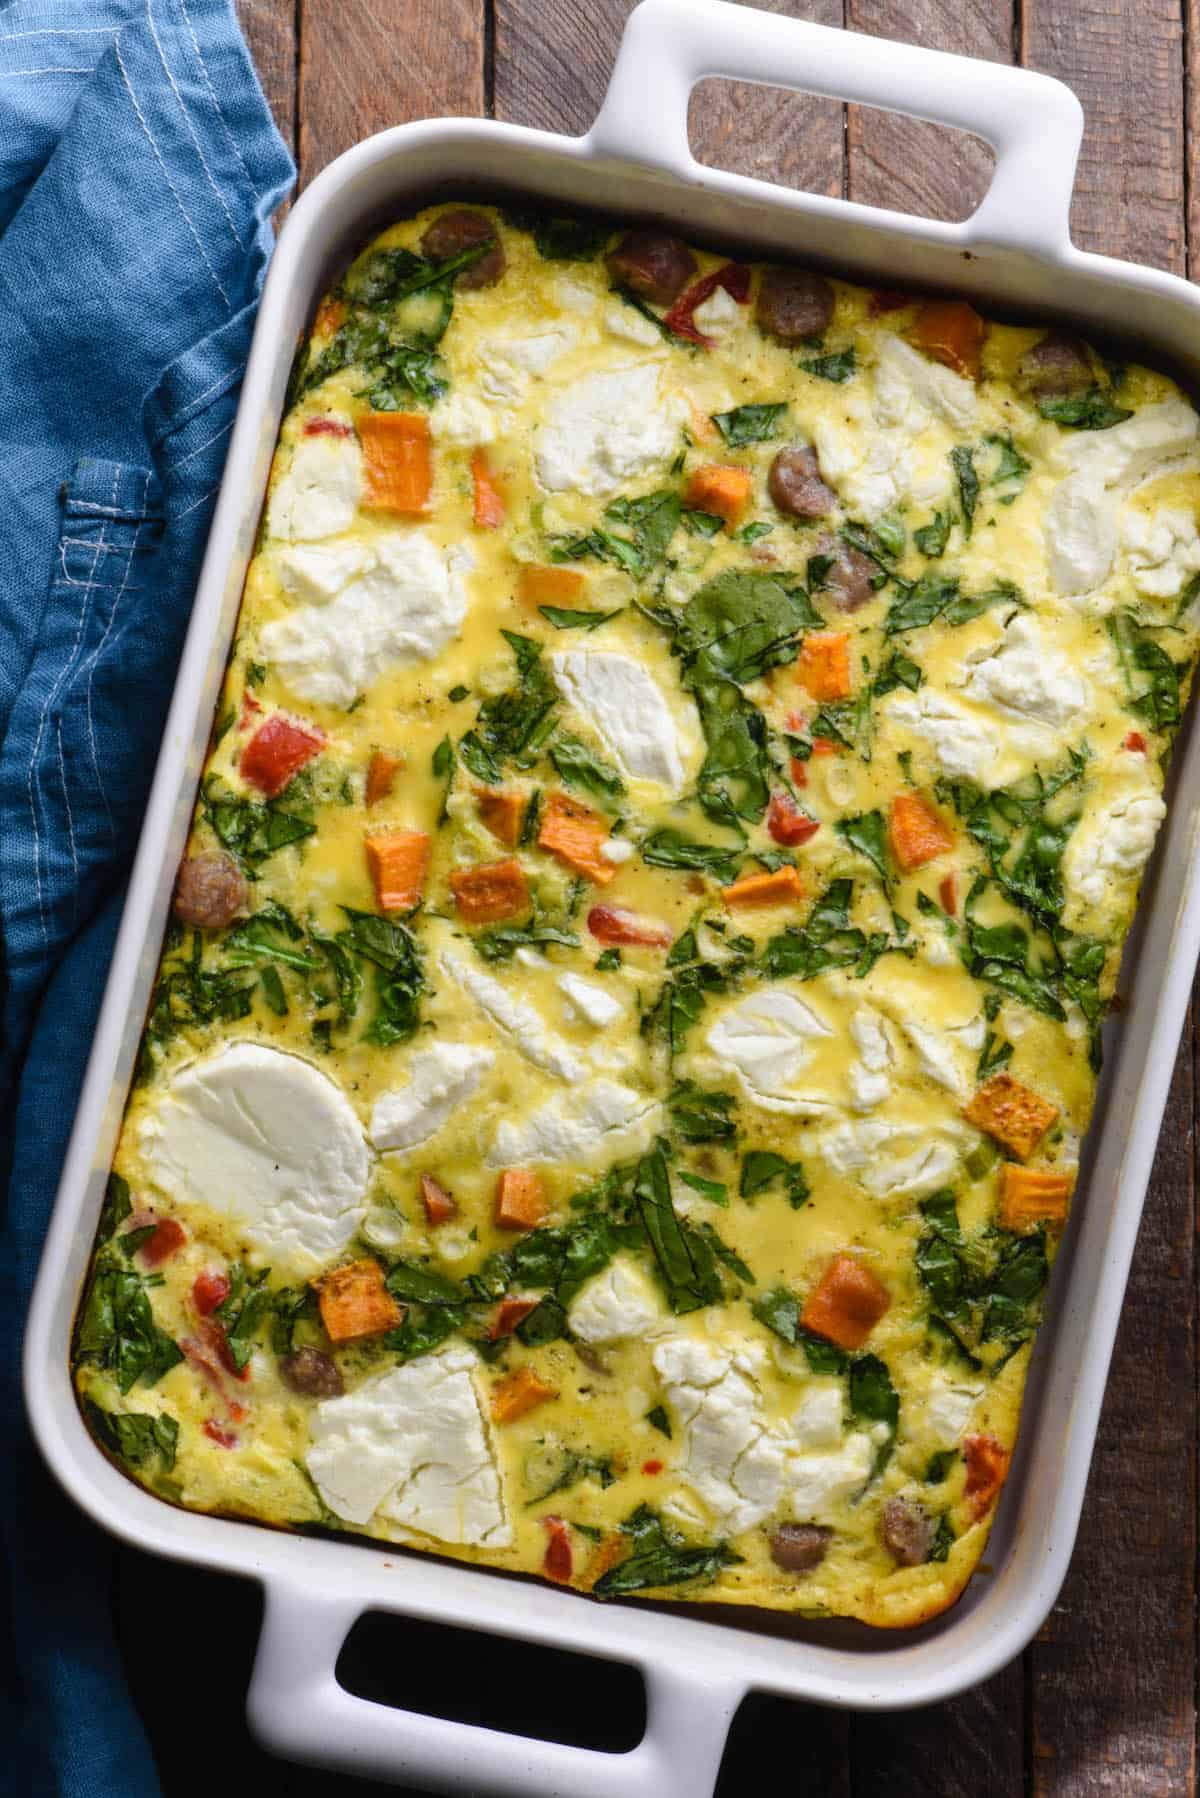 Egg bake made with sweet potatoes, sausage, spinach and goat cheese, in rectangular white baking dish.